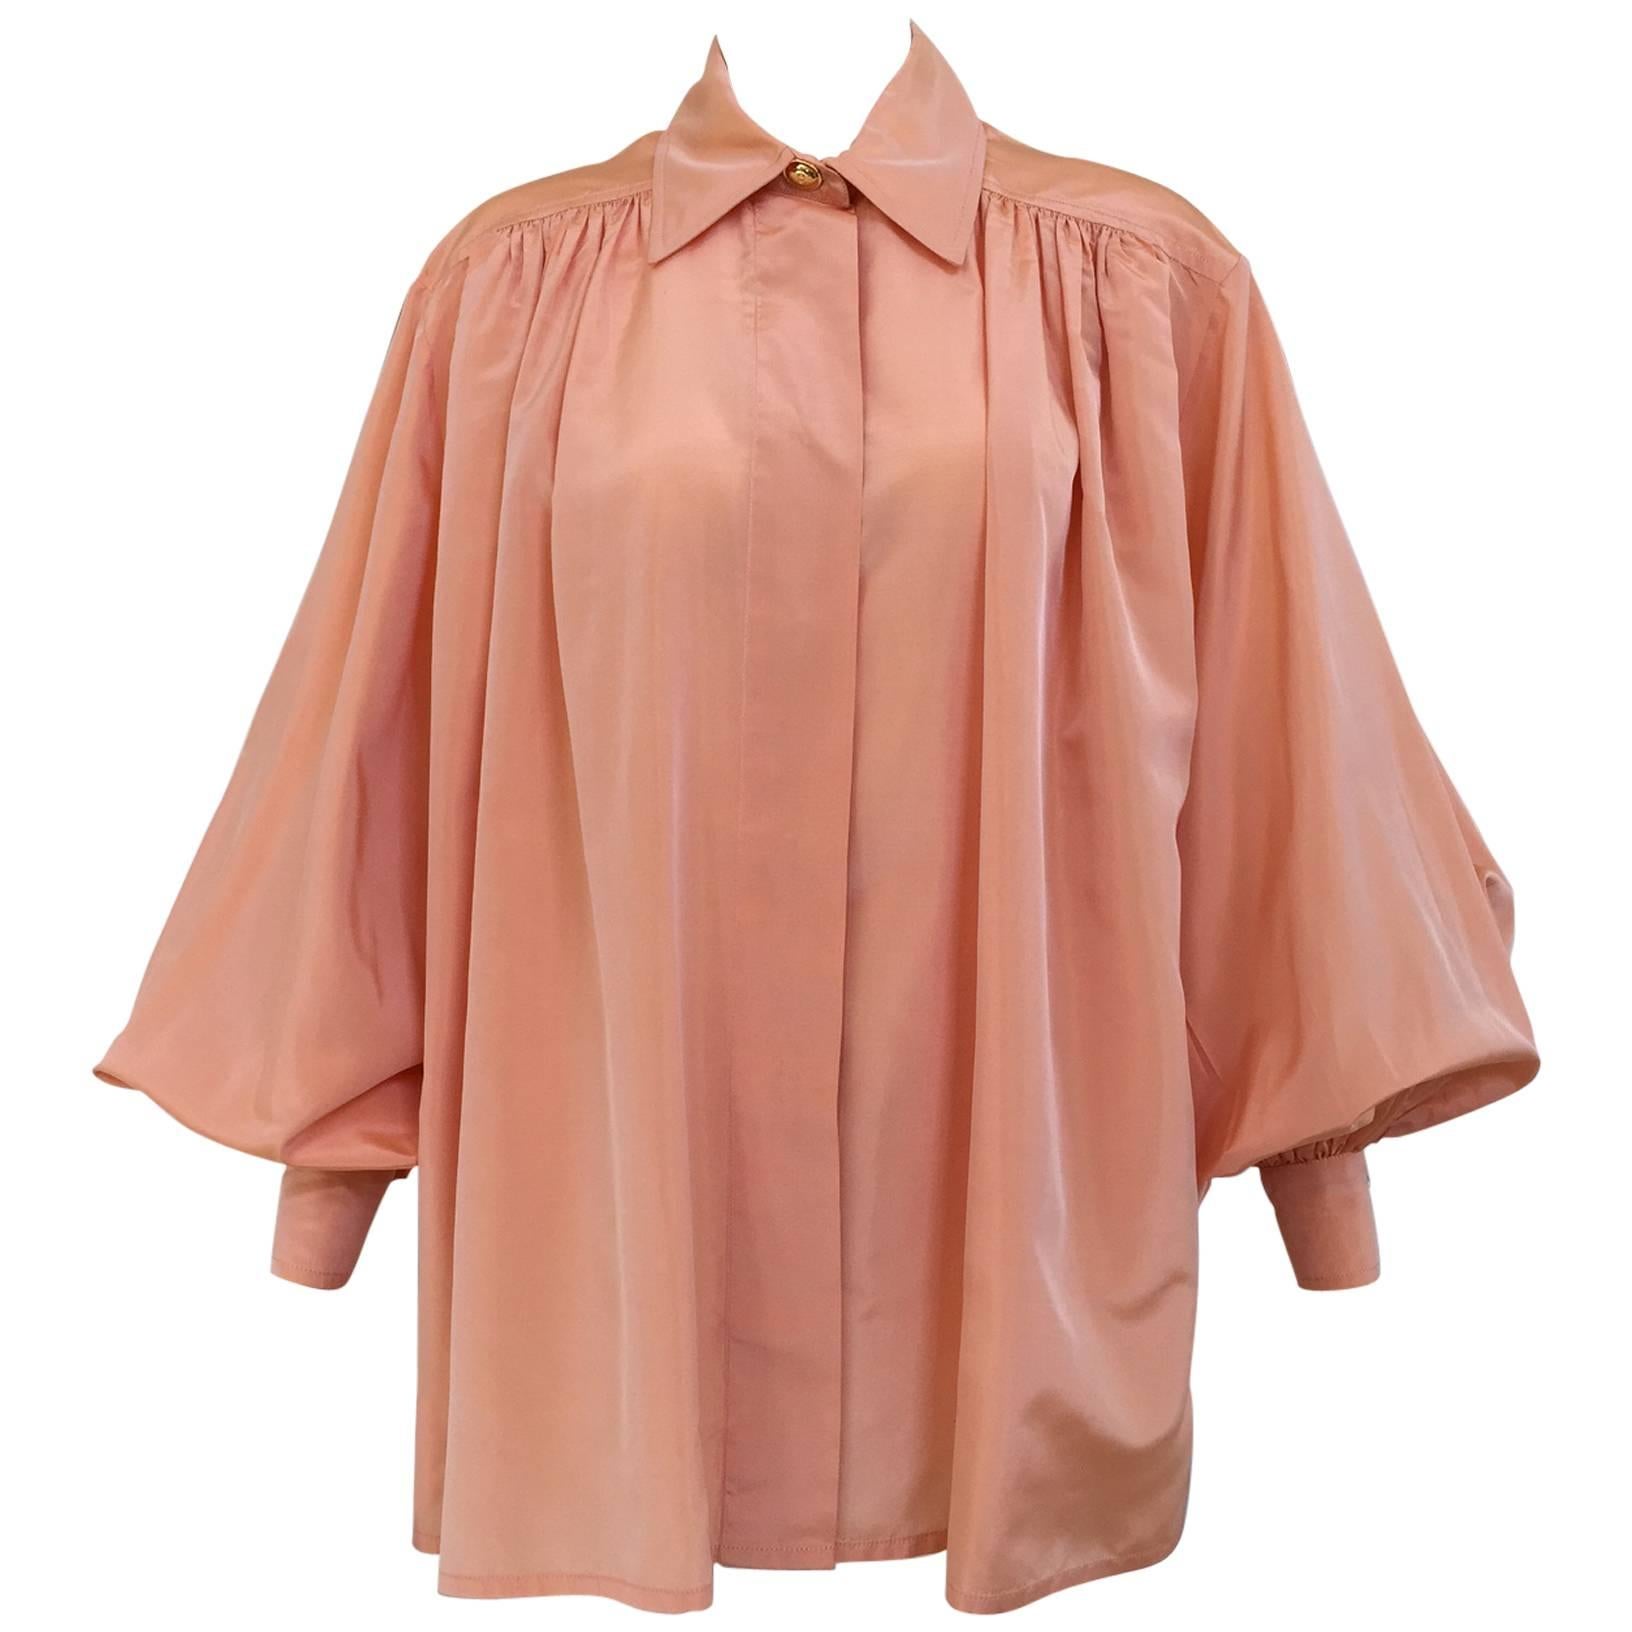 90s Christian Dior by Gianfranco Ferre bishop sleeve silk blouse